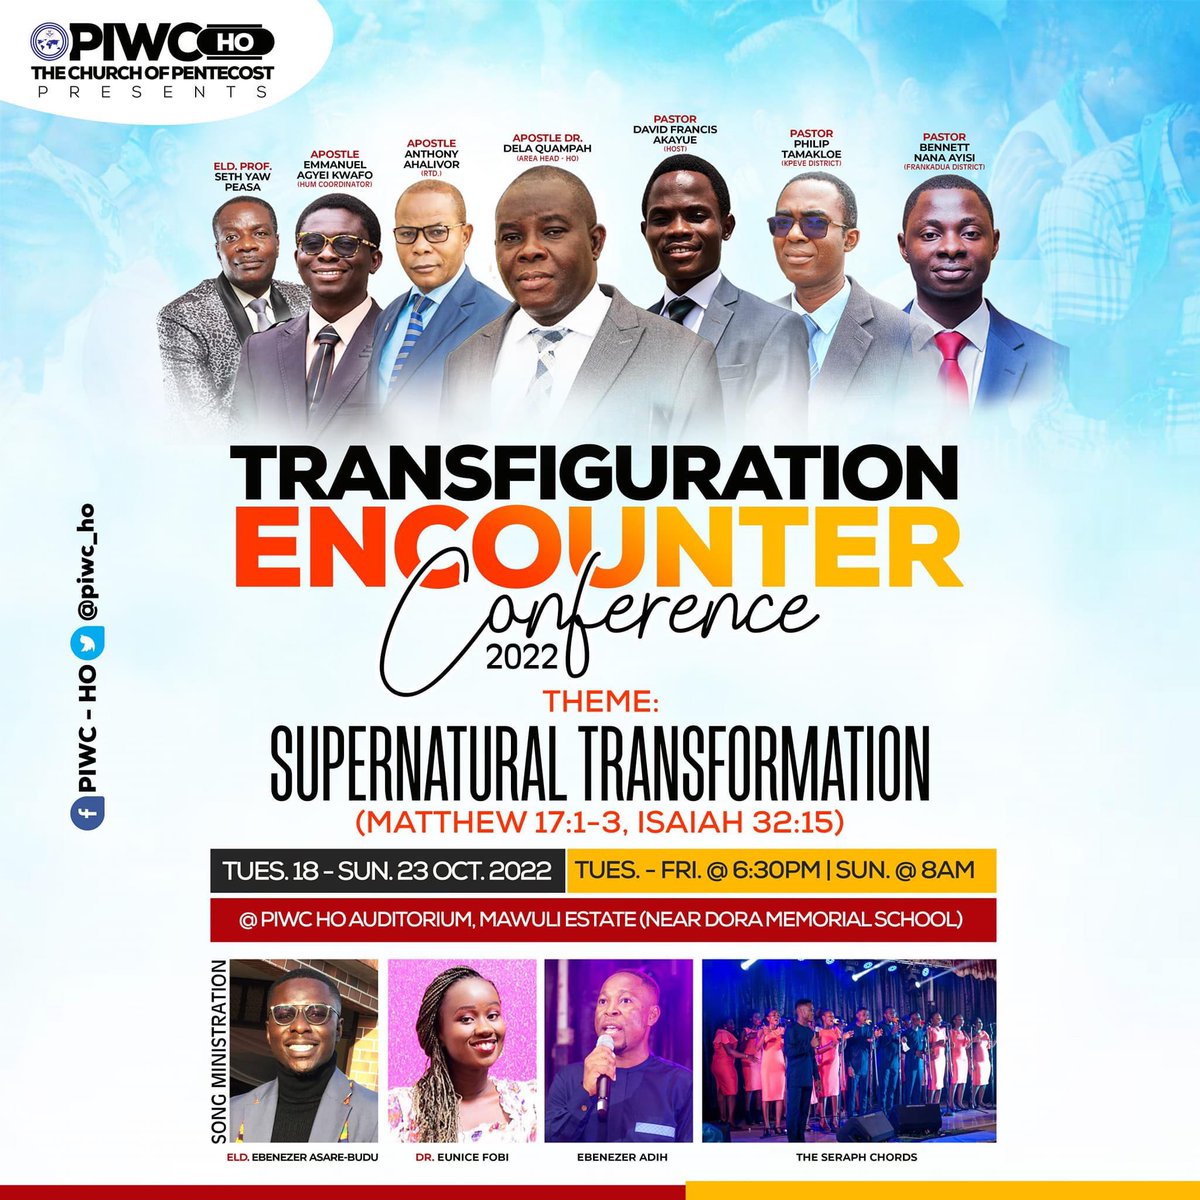 Get ready for something metamorphic this October!!!

Transfiguration Encounter Conference!!!

#TEC22
#SupernaturalTransformation